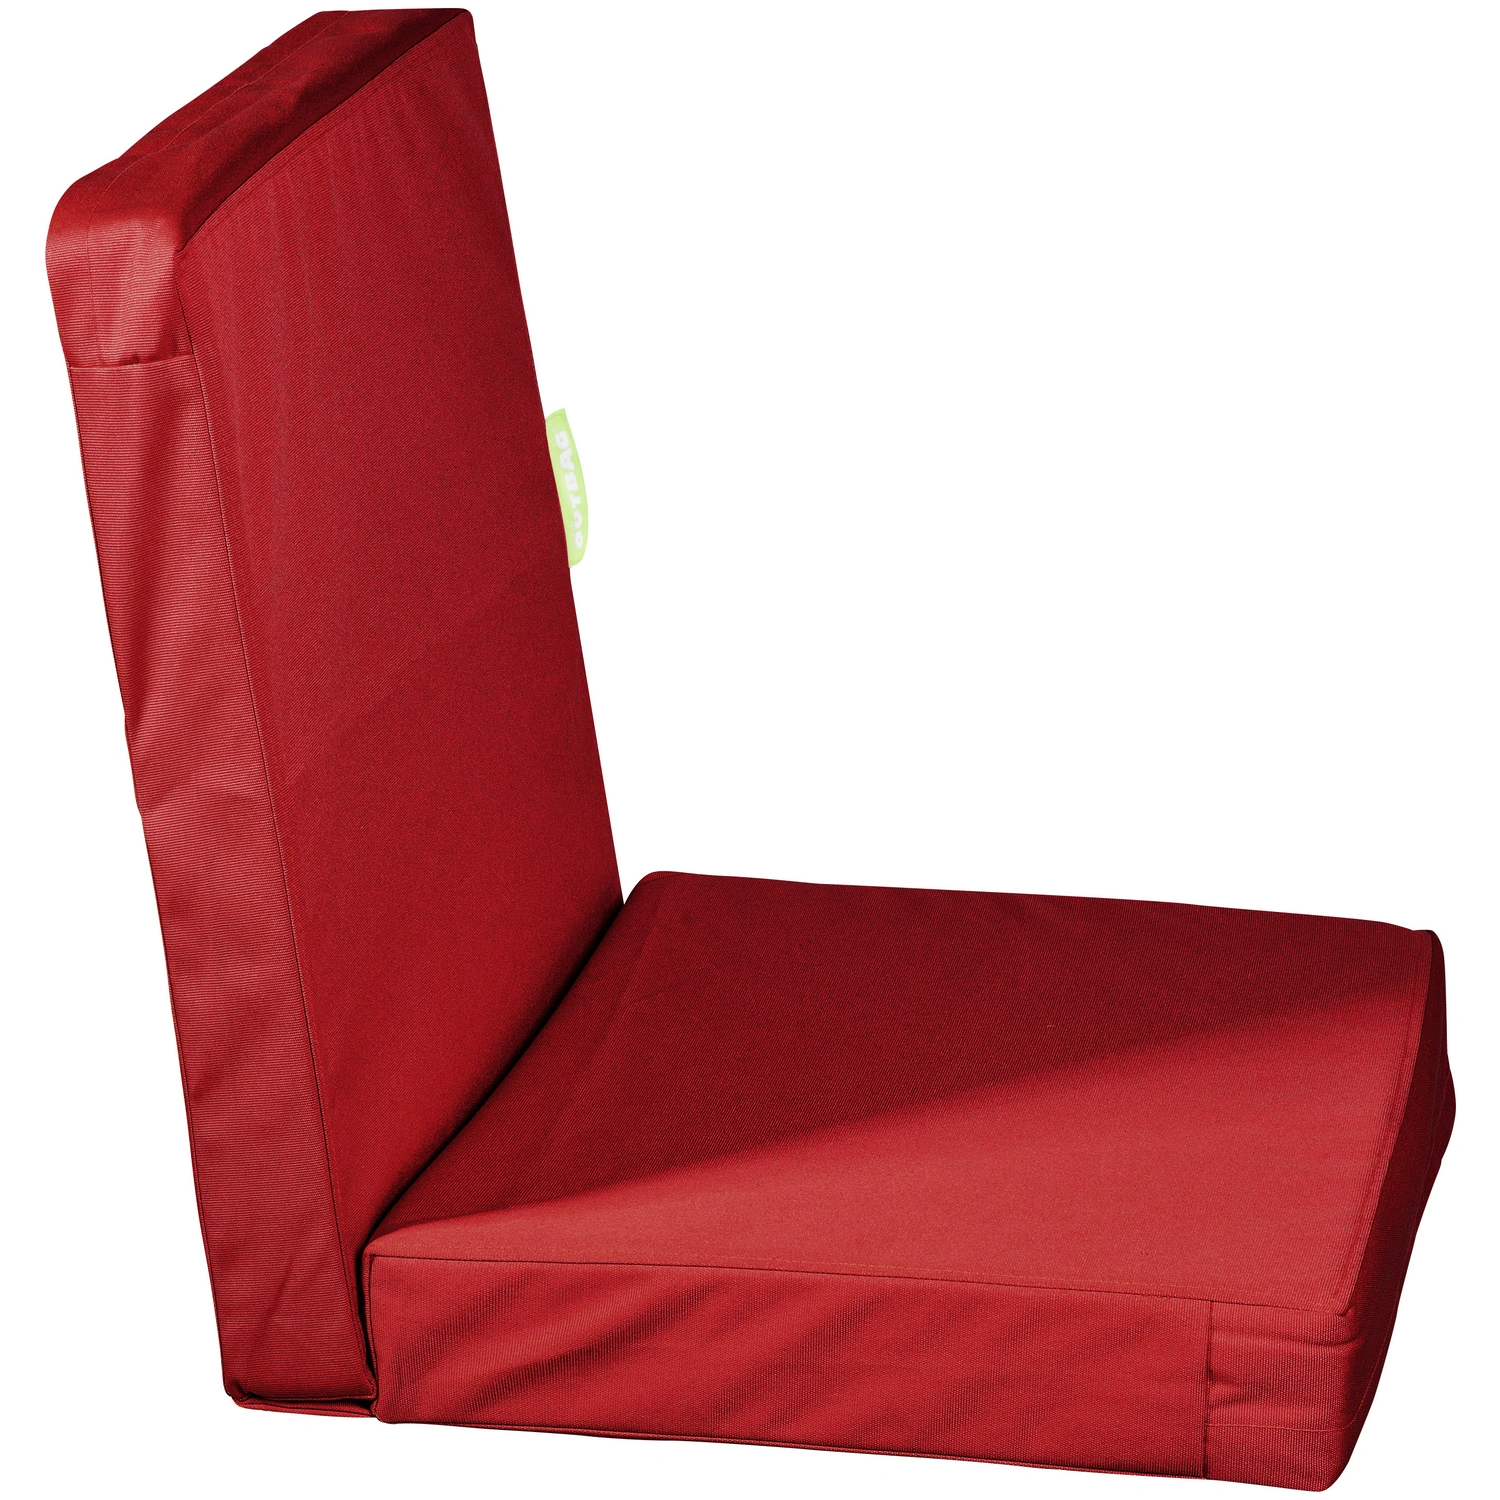 OUTBAG Sesselauflage »HighRise Plus«, rot, BxL: 105 x 50 cm